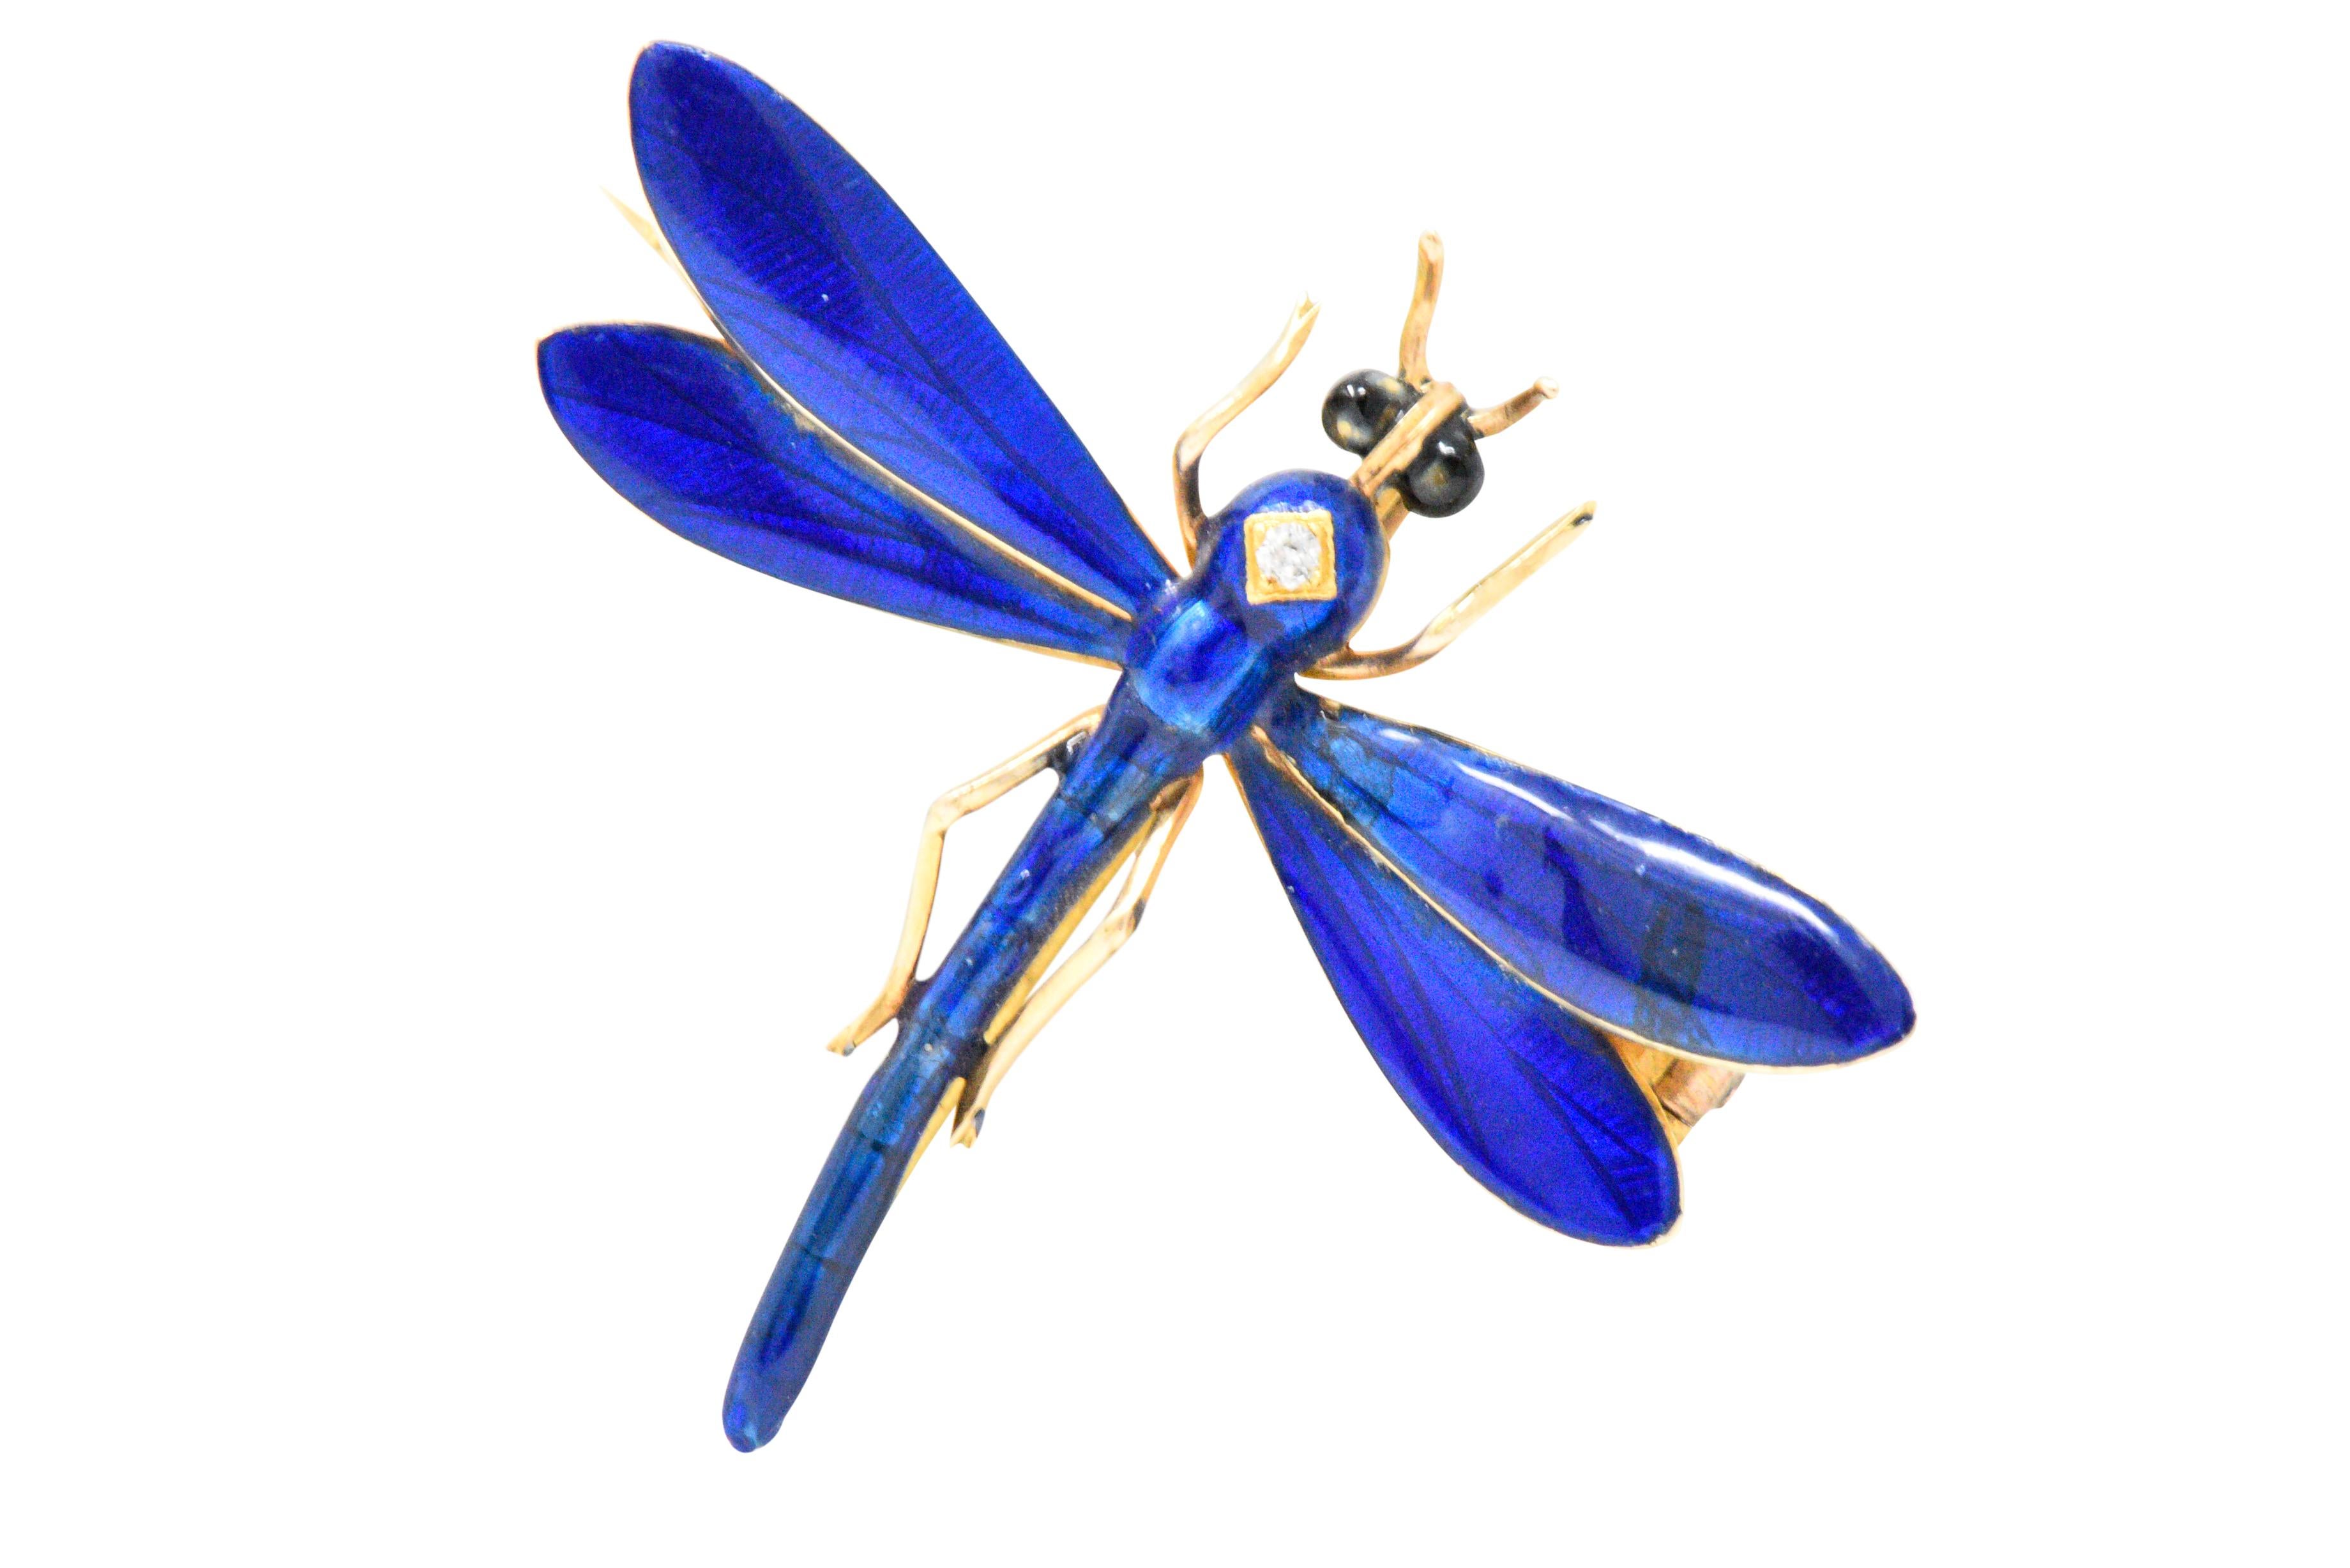 Designed as a dragonfly with an old mine cut diamond set in the center of it's body, weighing approximately 0.01 carats total

Bright blue enamel body and wings with black enamel eyes in lush 14k gold

Just delightful and whimsical

Maker's mark for